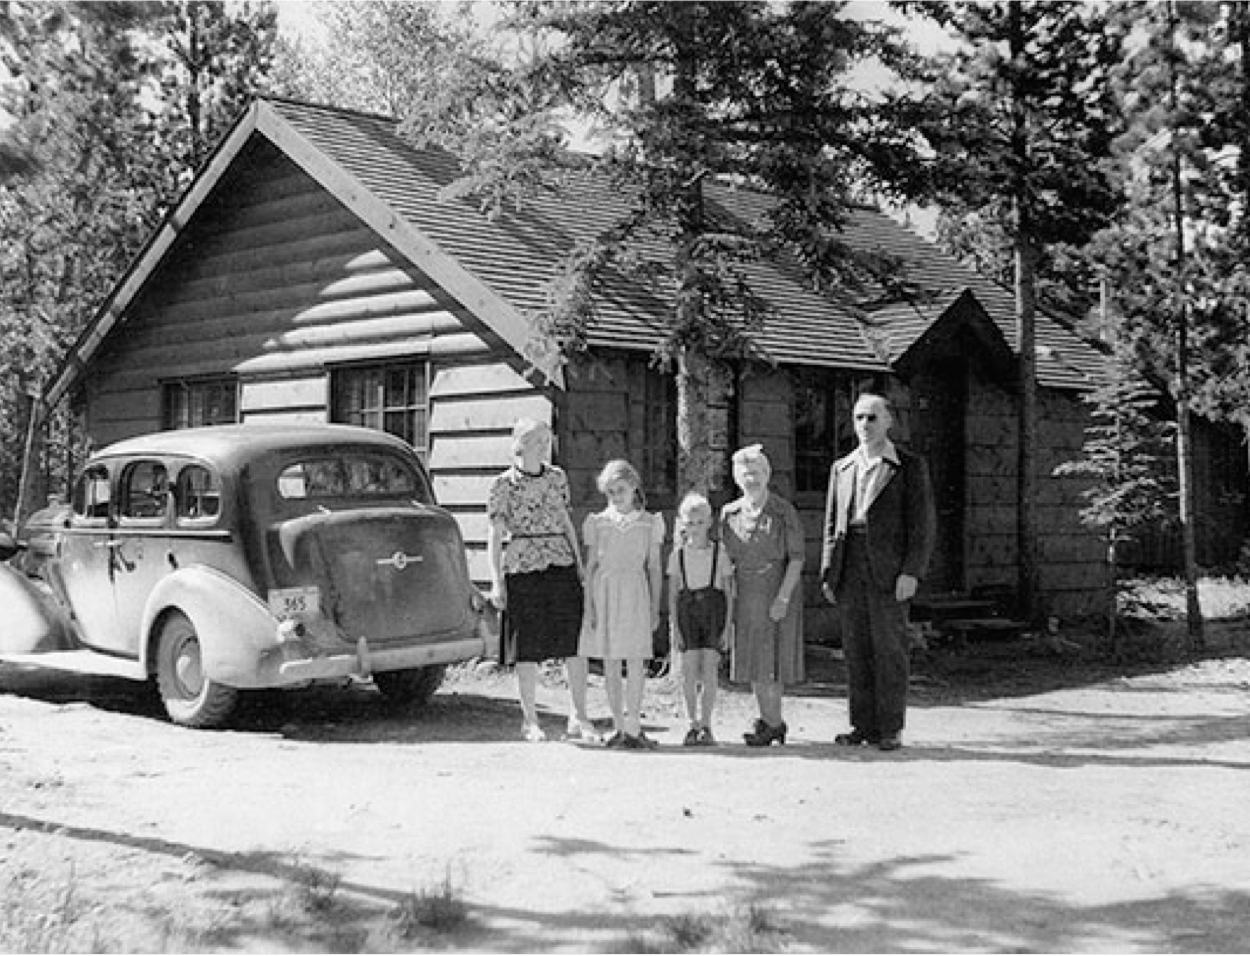 A family stands for a photo in 1956 in front of a Jasper Cabin rental